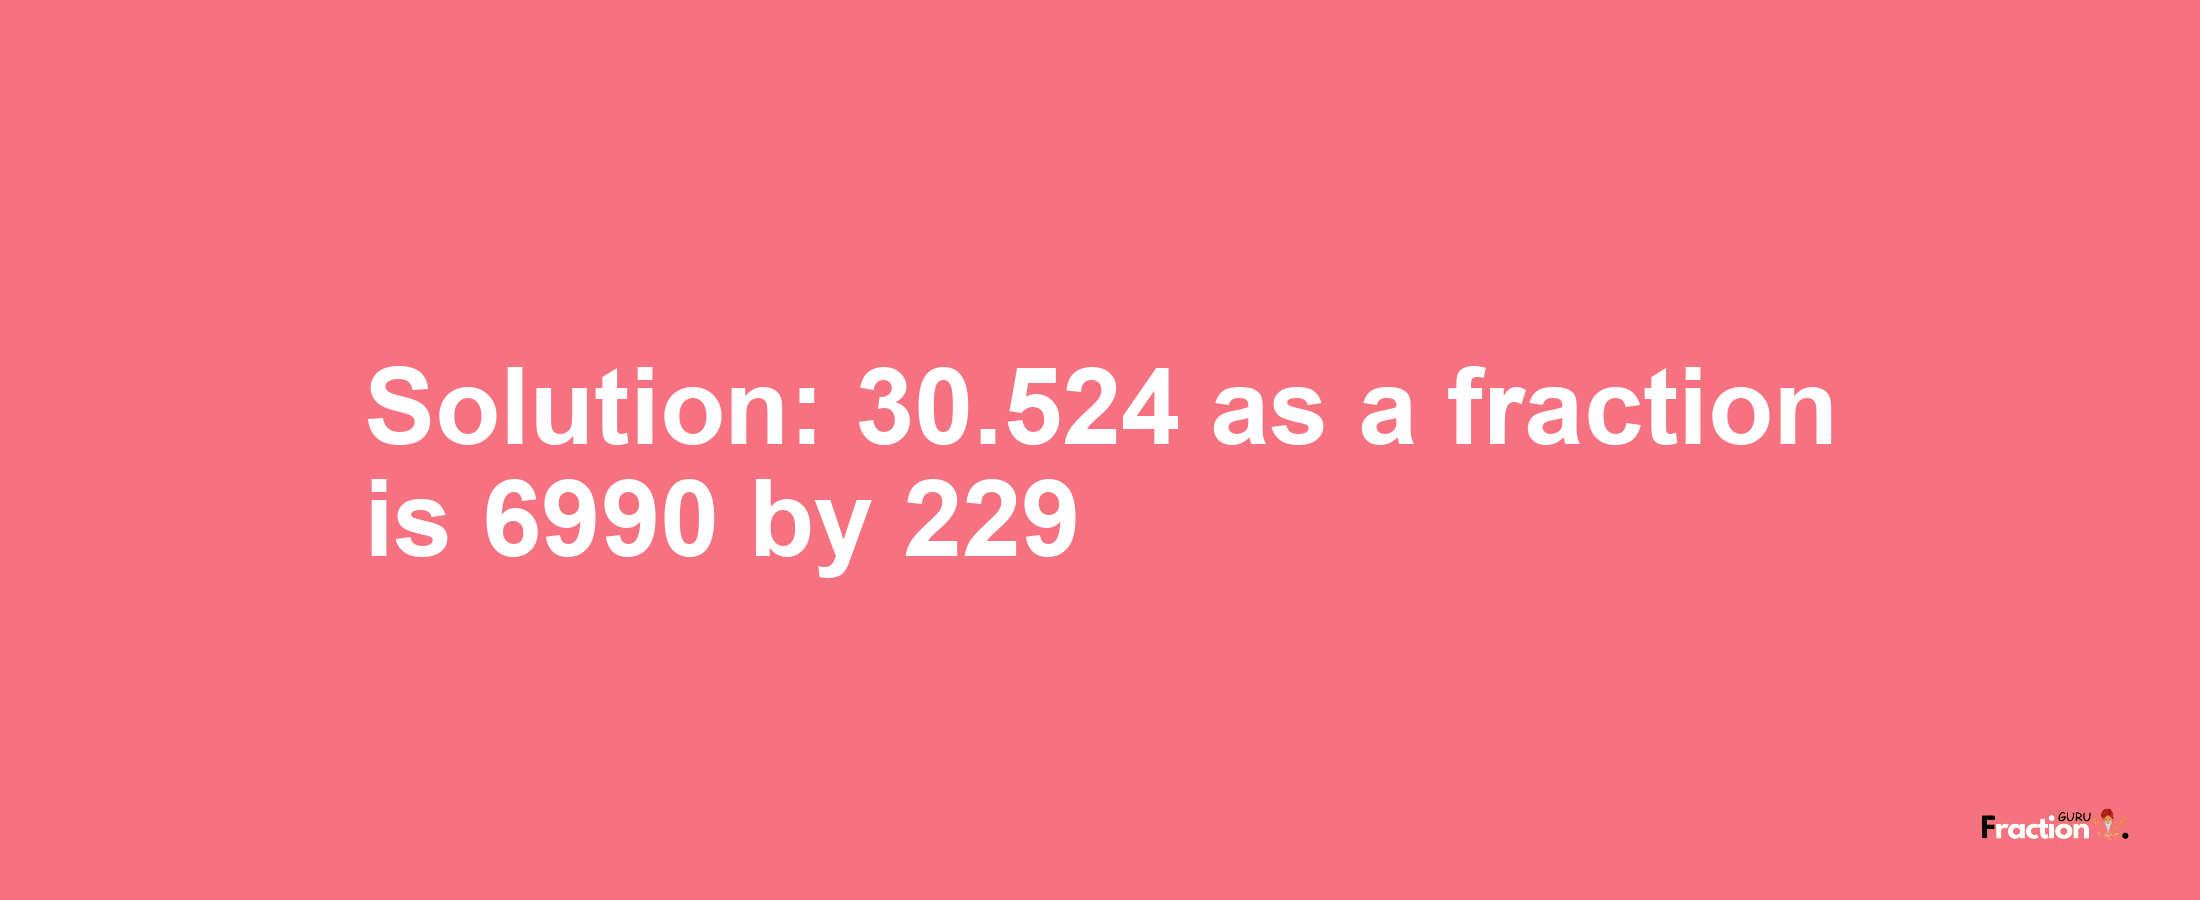 Solution:30.524 as a fraction is 6990/229